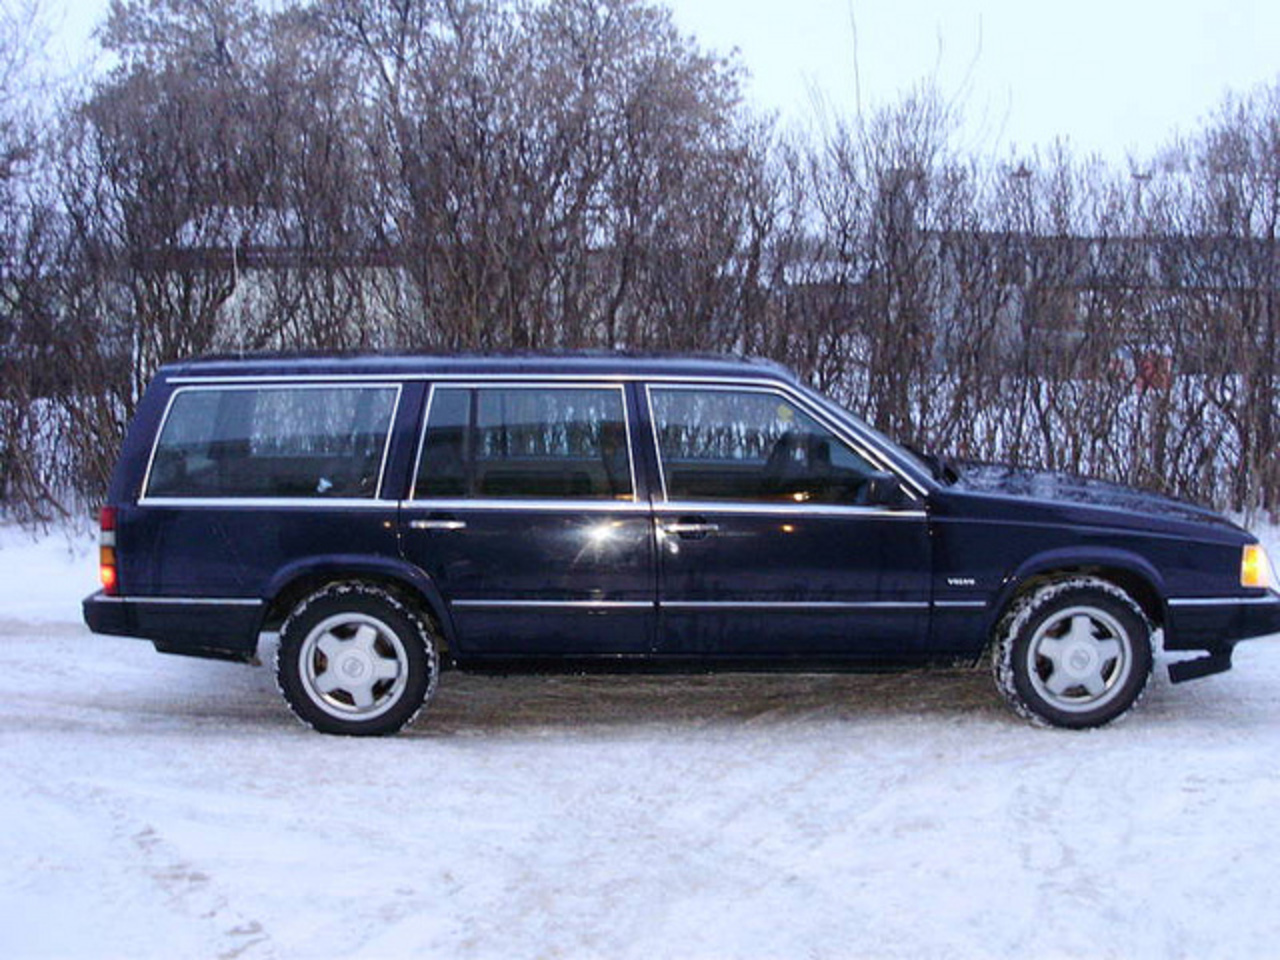 1989 Volvo 760 TURBO Wagon. My new ride. For only 700 dollars.